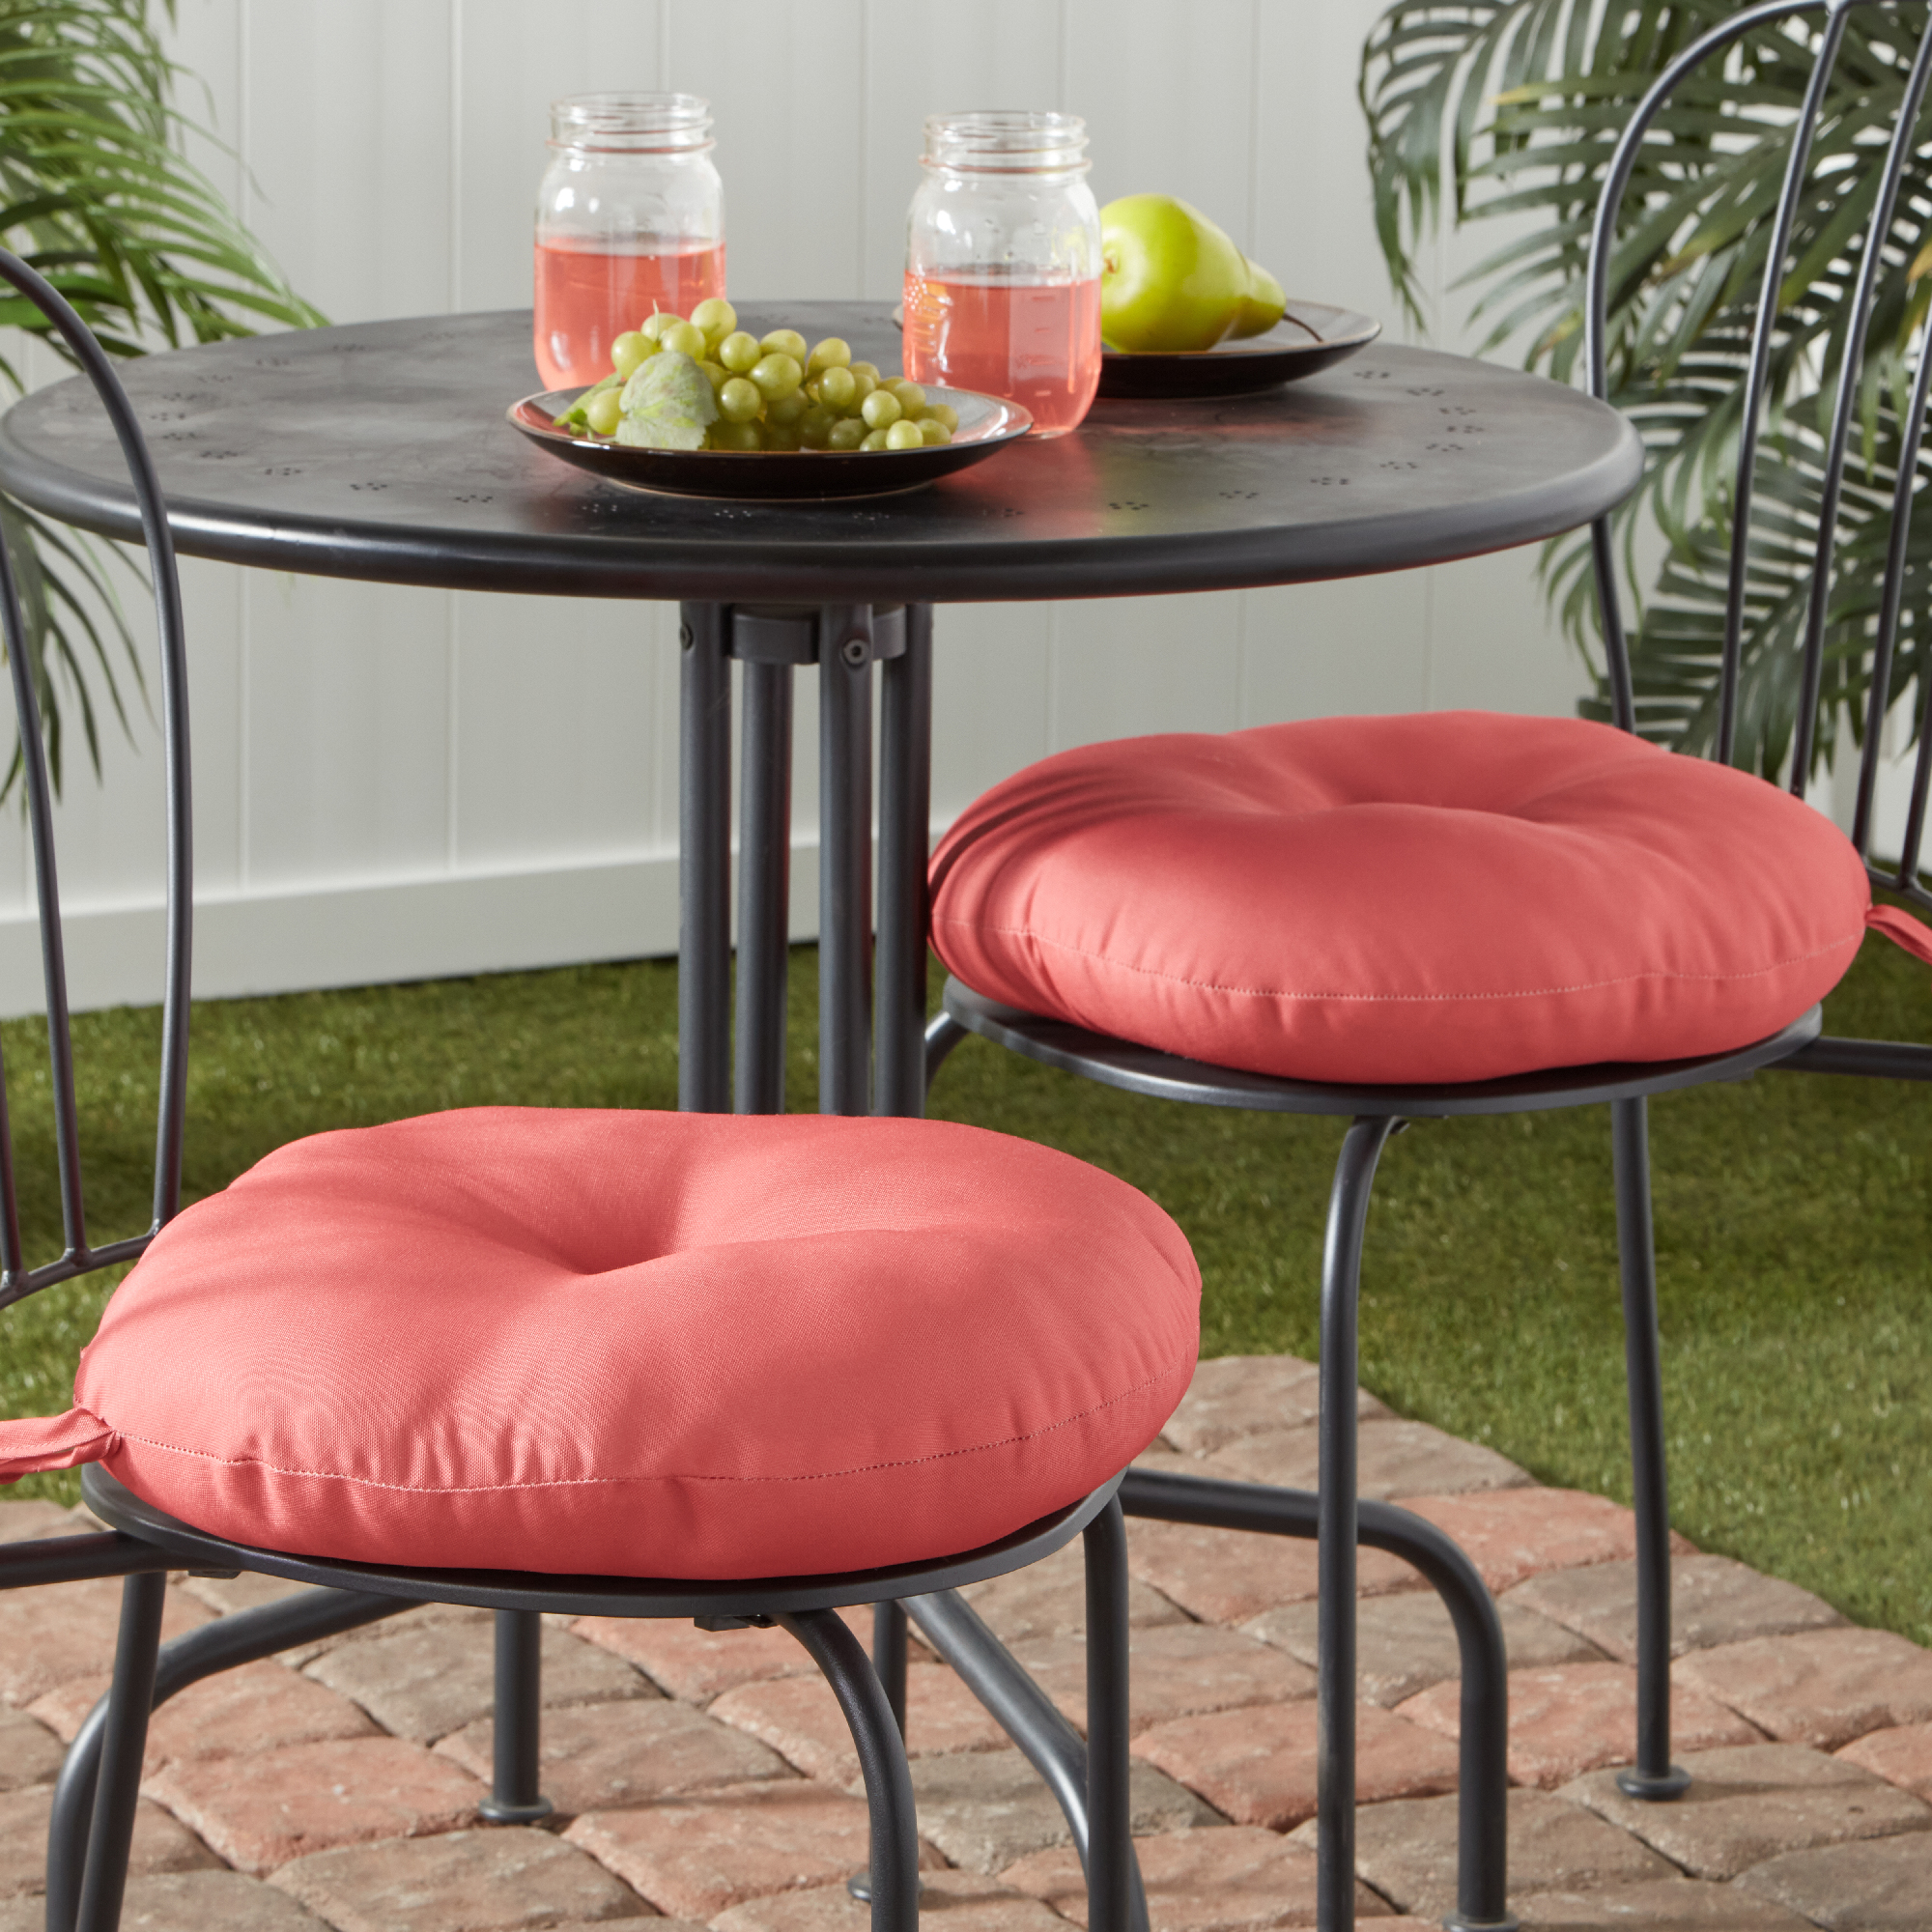 Greendale Home Fashions Coral 15 in. Round Outdoor Reversible Bistro Seat Cushion (Set of 2) - image 3 of 6